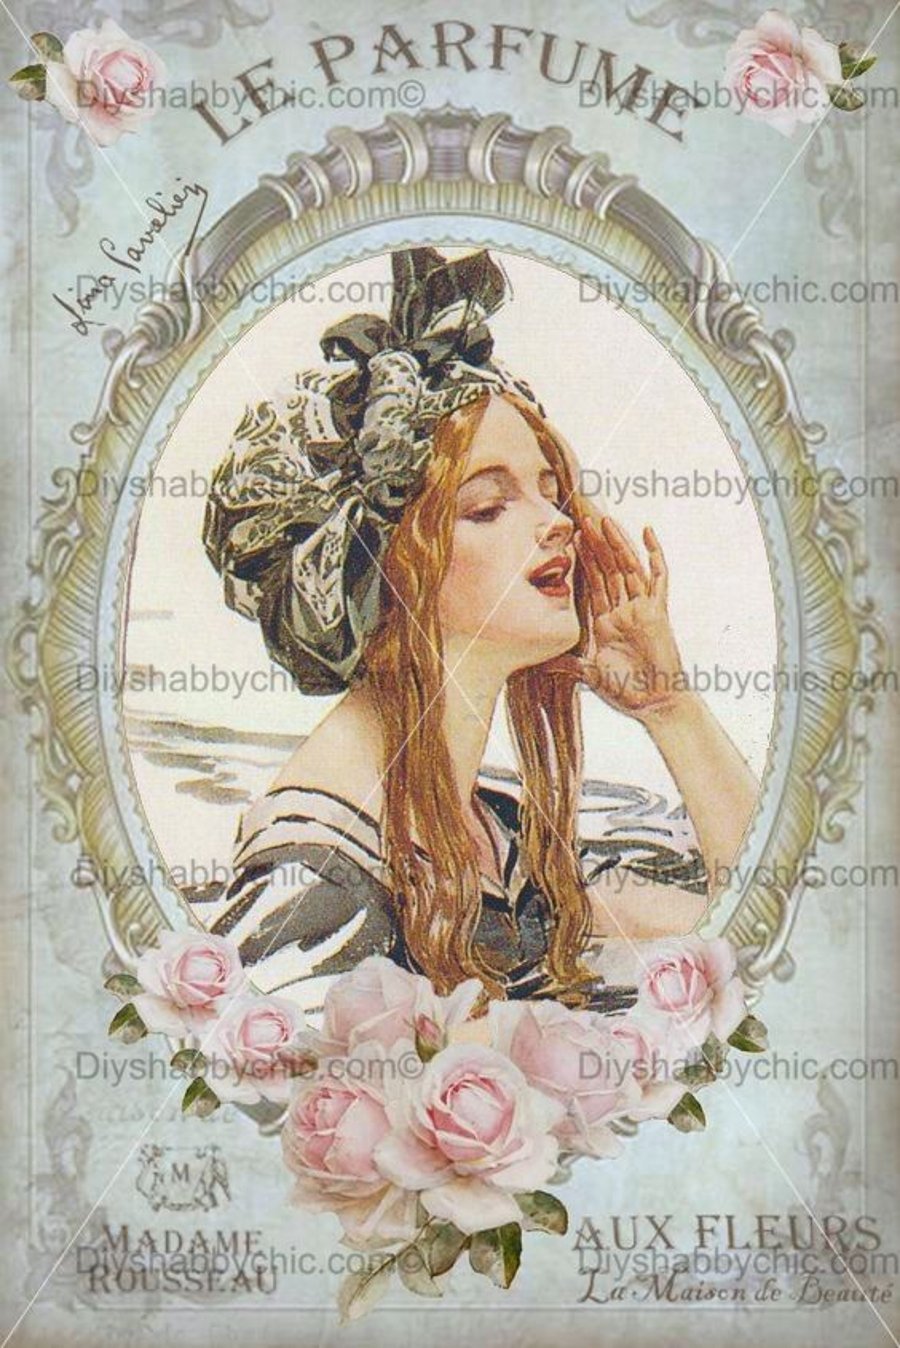 Waterslide Wood Furniture Decal Vintage Image Transfer Shabby Chic Le Parfume